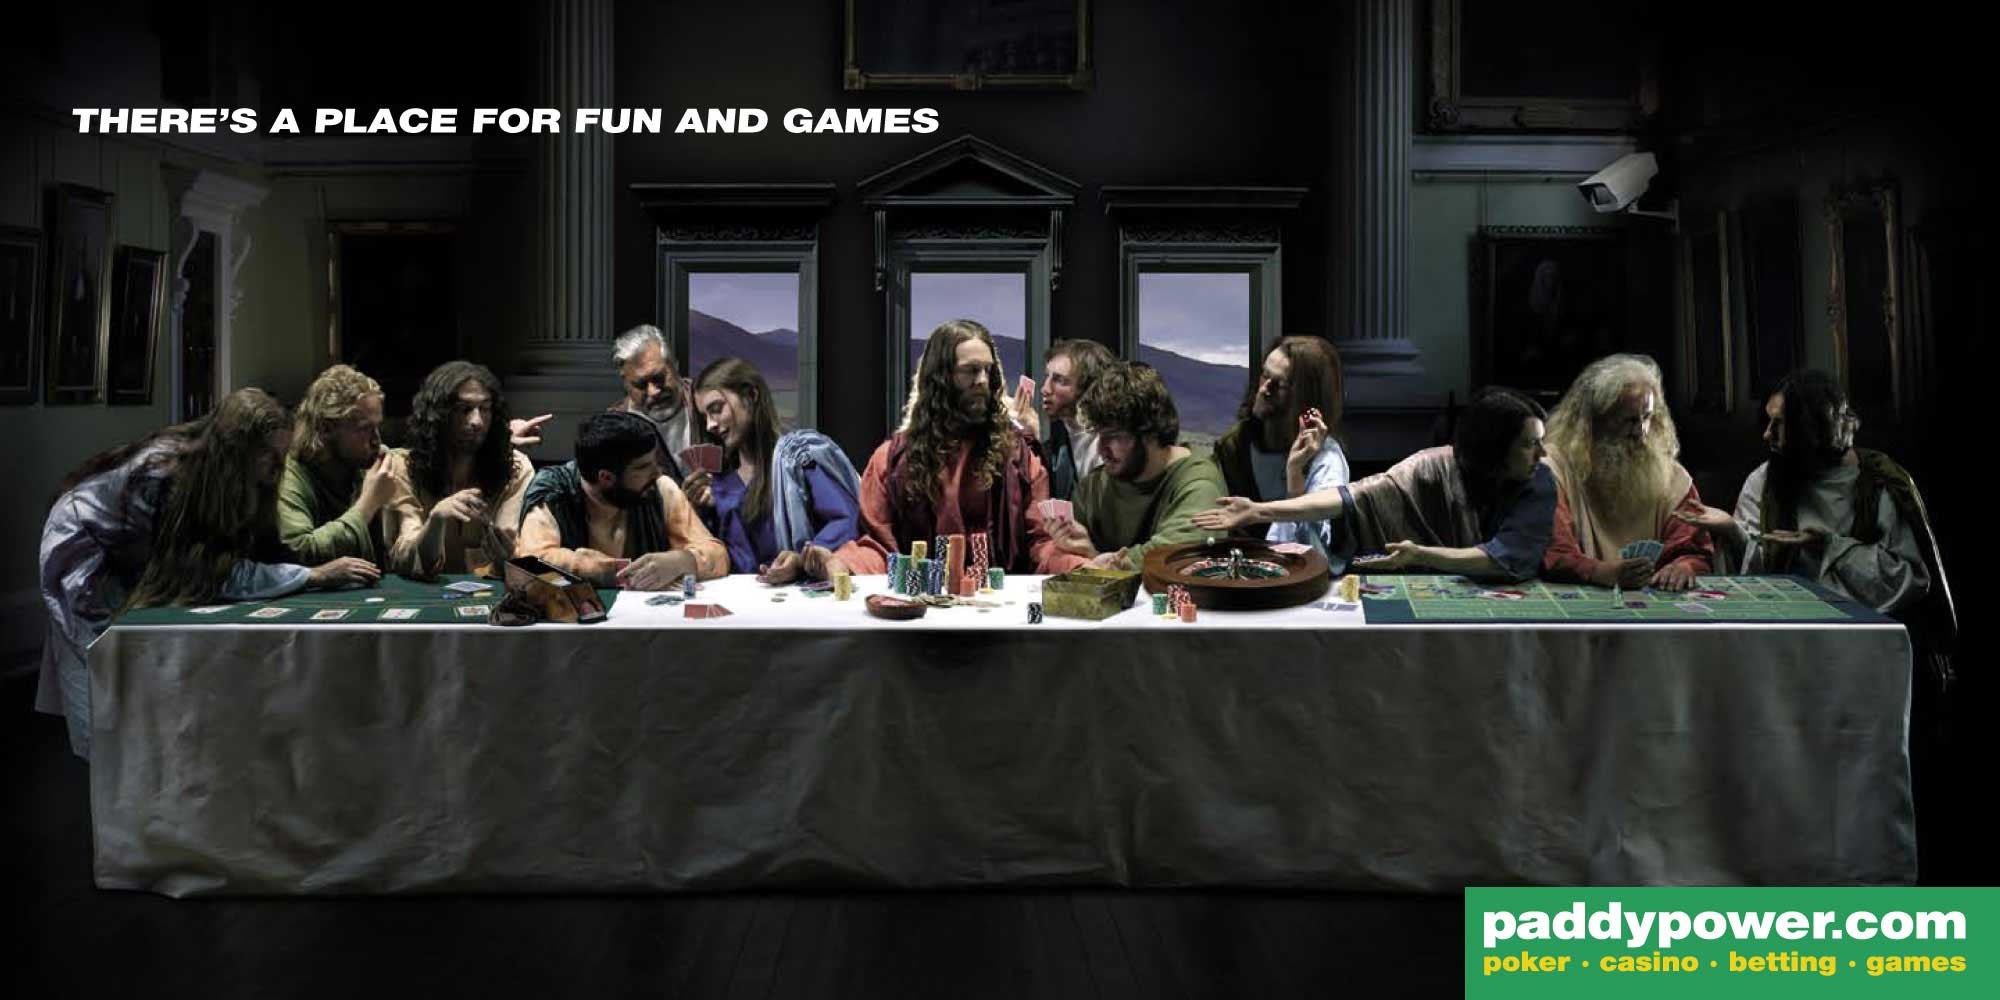 Paddy Power's last supper advert